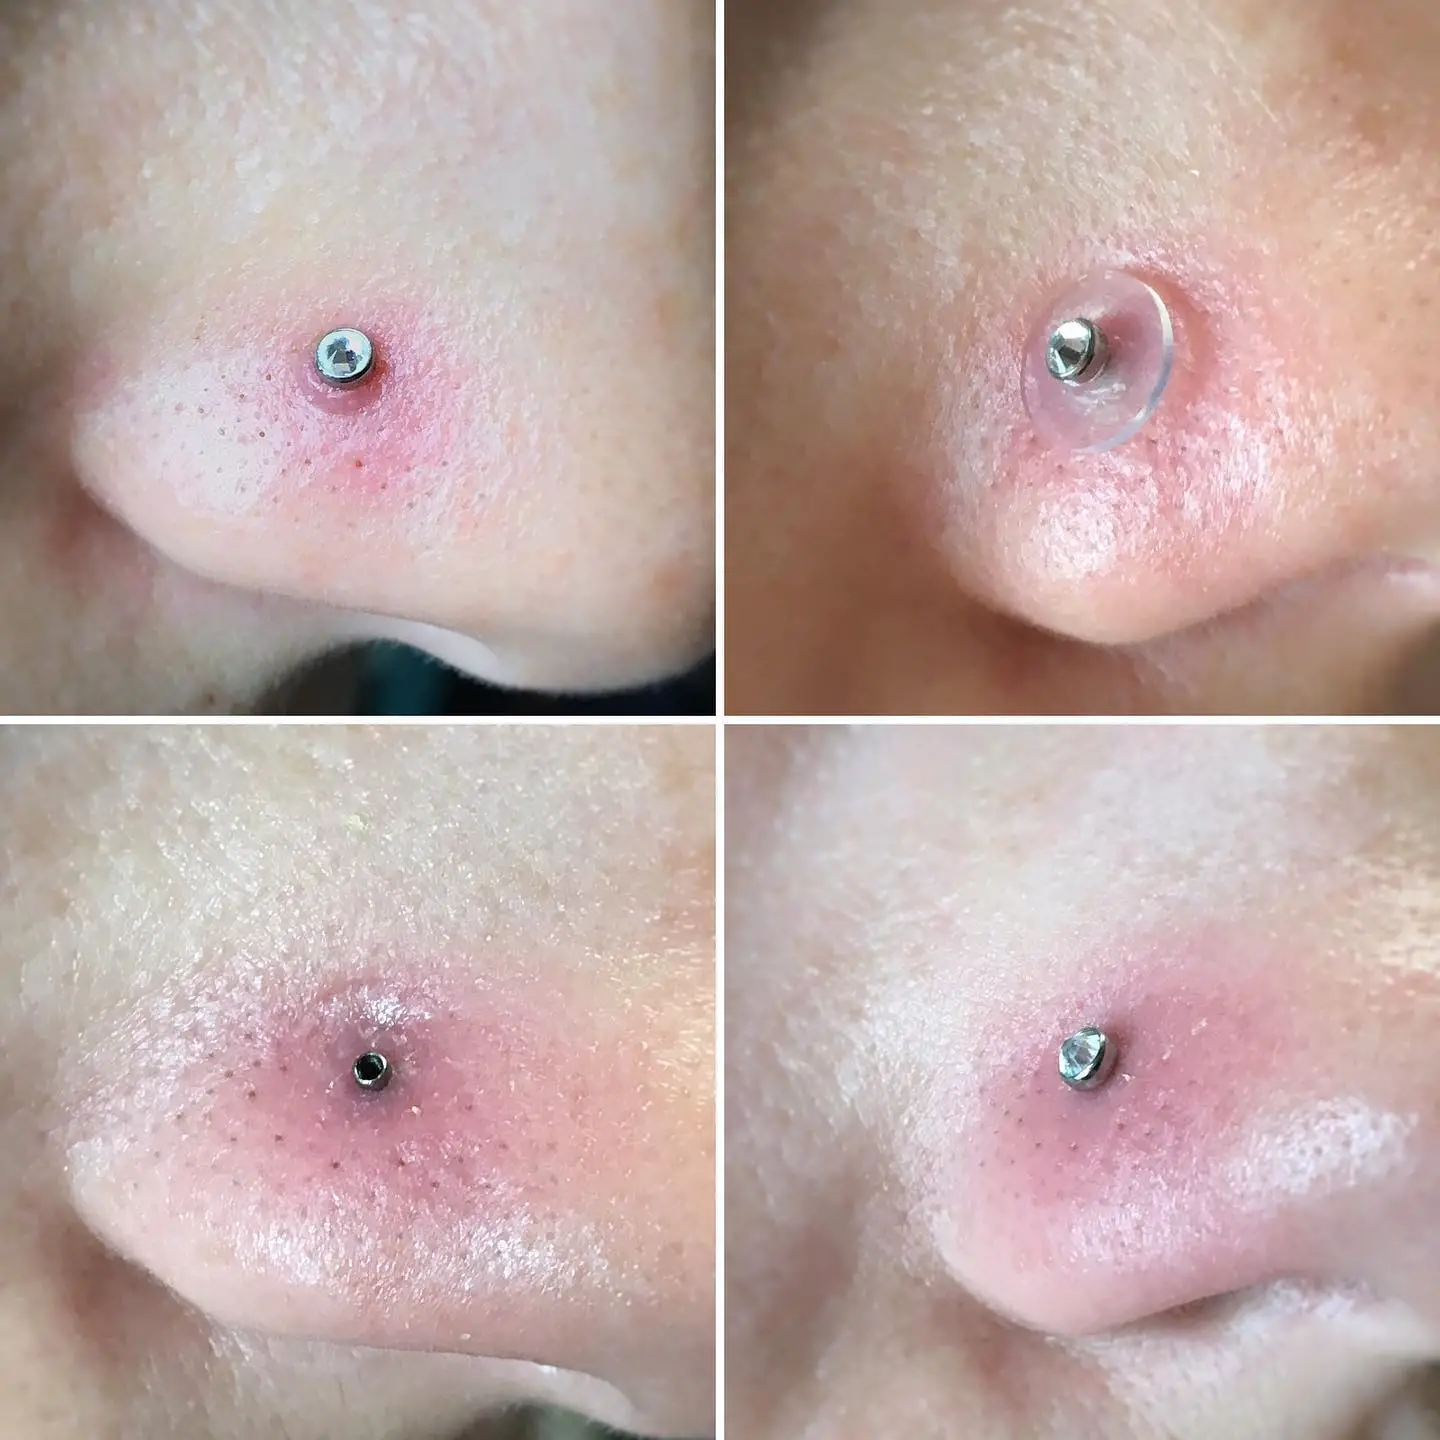 How To Heal Piercing Bumps With Aspirin Paste?